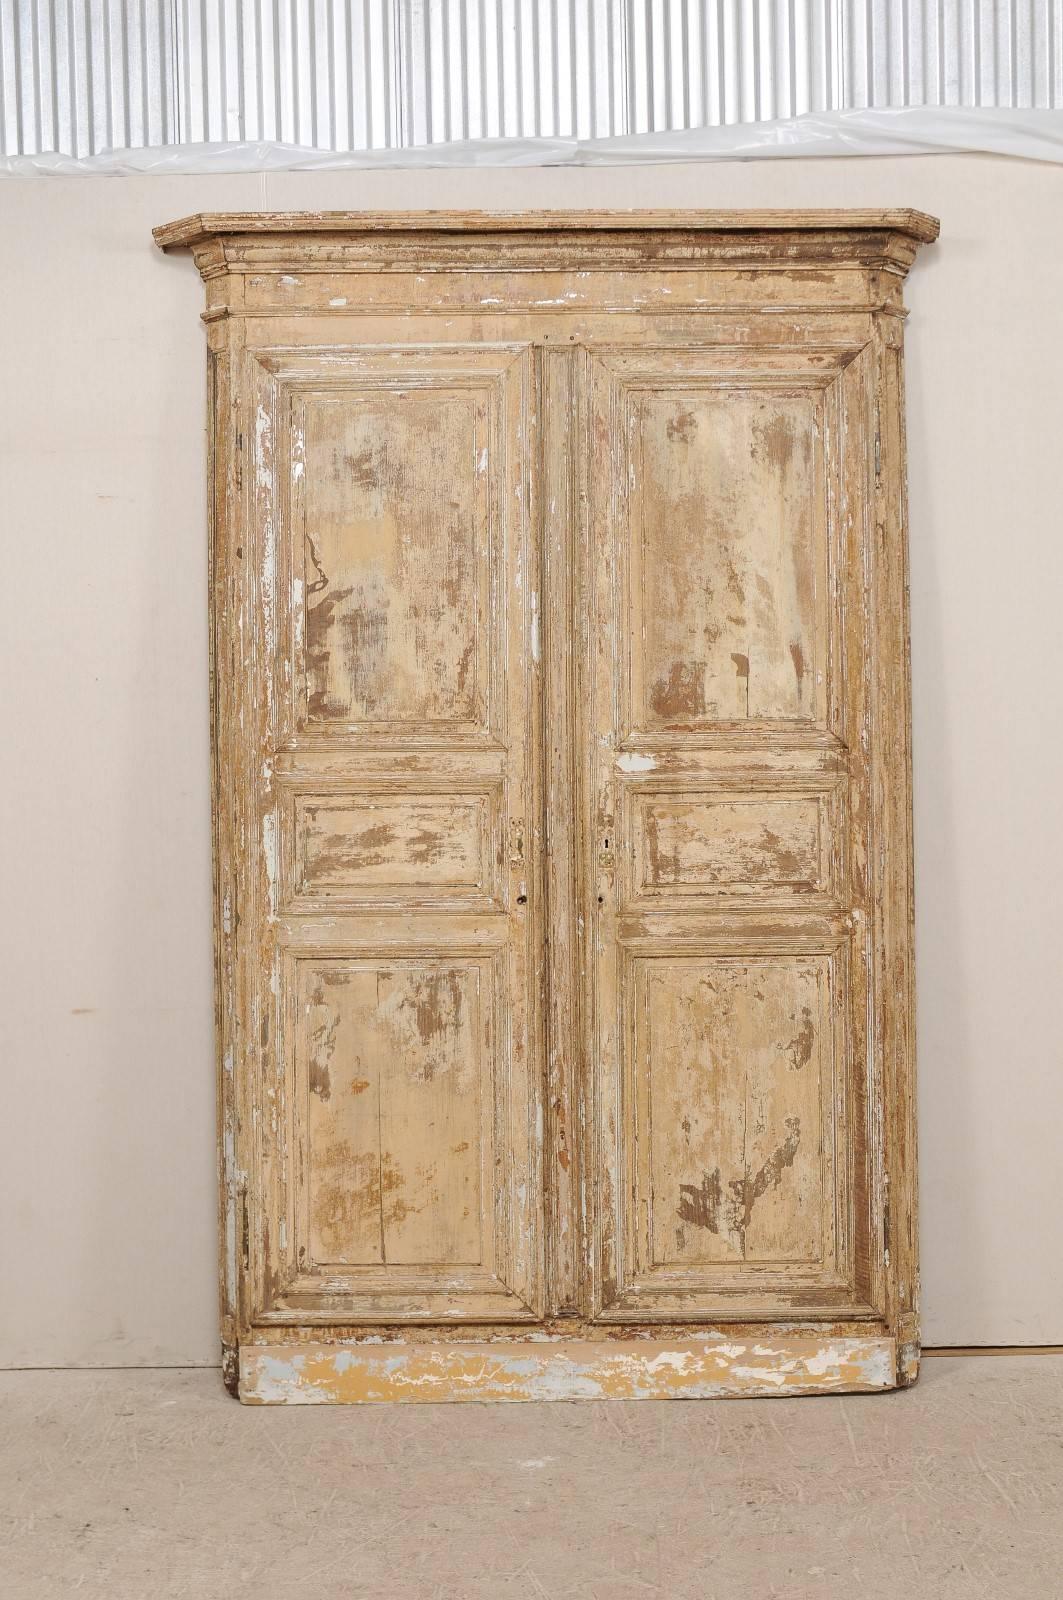 A pair of early 19th century Italian doors within their original carved wood casing. This fabulous piece consists of two antique Italian doors with their original casing. The surround or casing has an exquisite crosshead pediment that is heavily